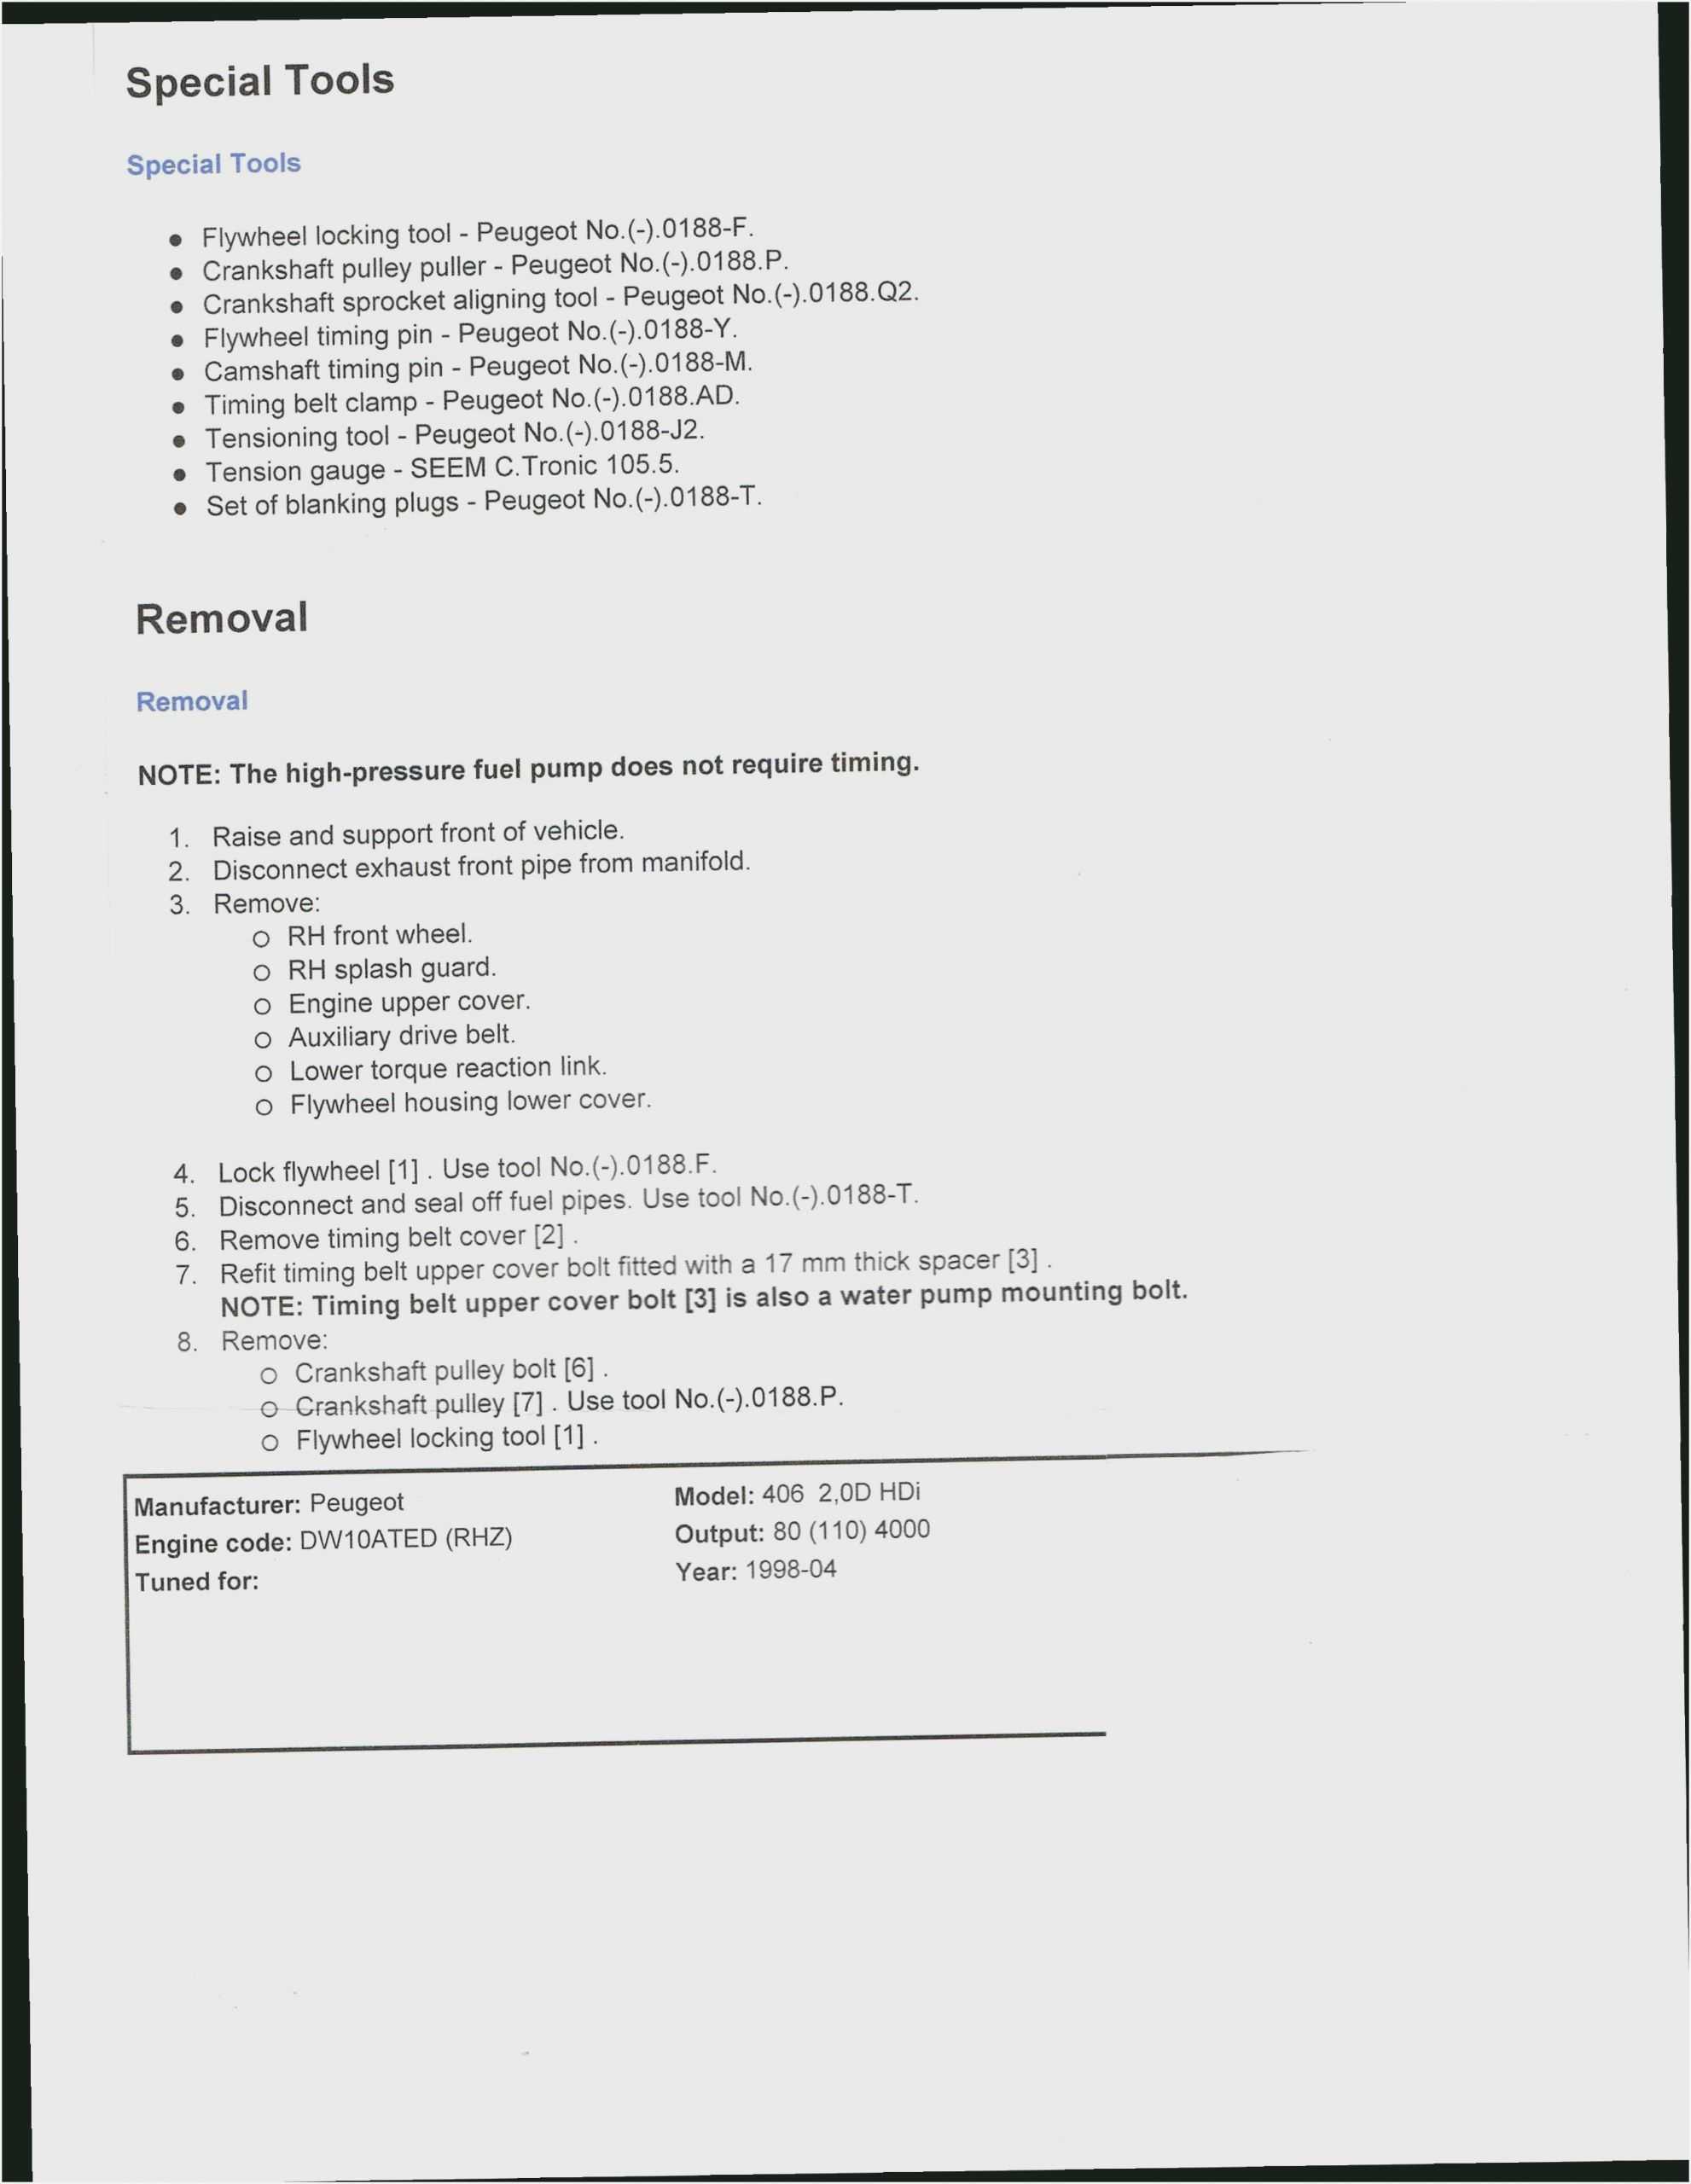 Downloadable Resume Templates For Word 2007 – Resume For Resume Templates Word 2007